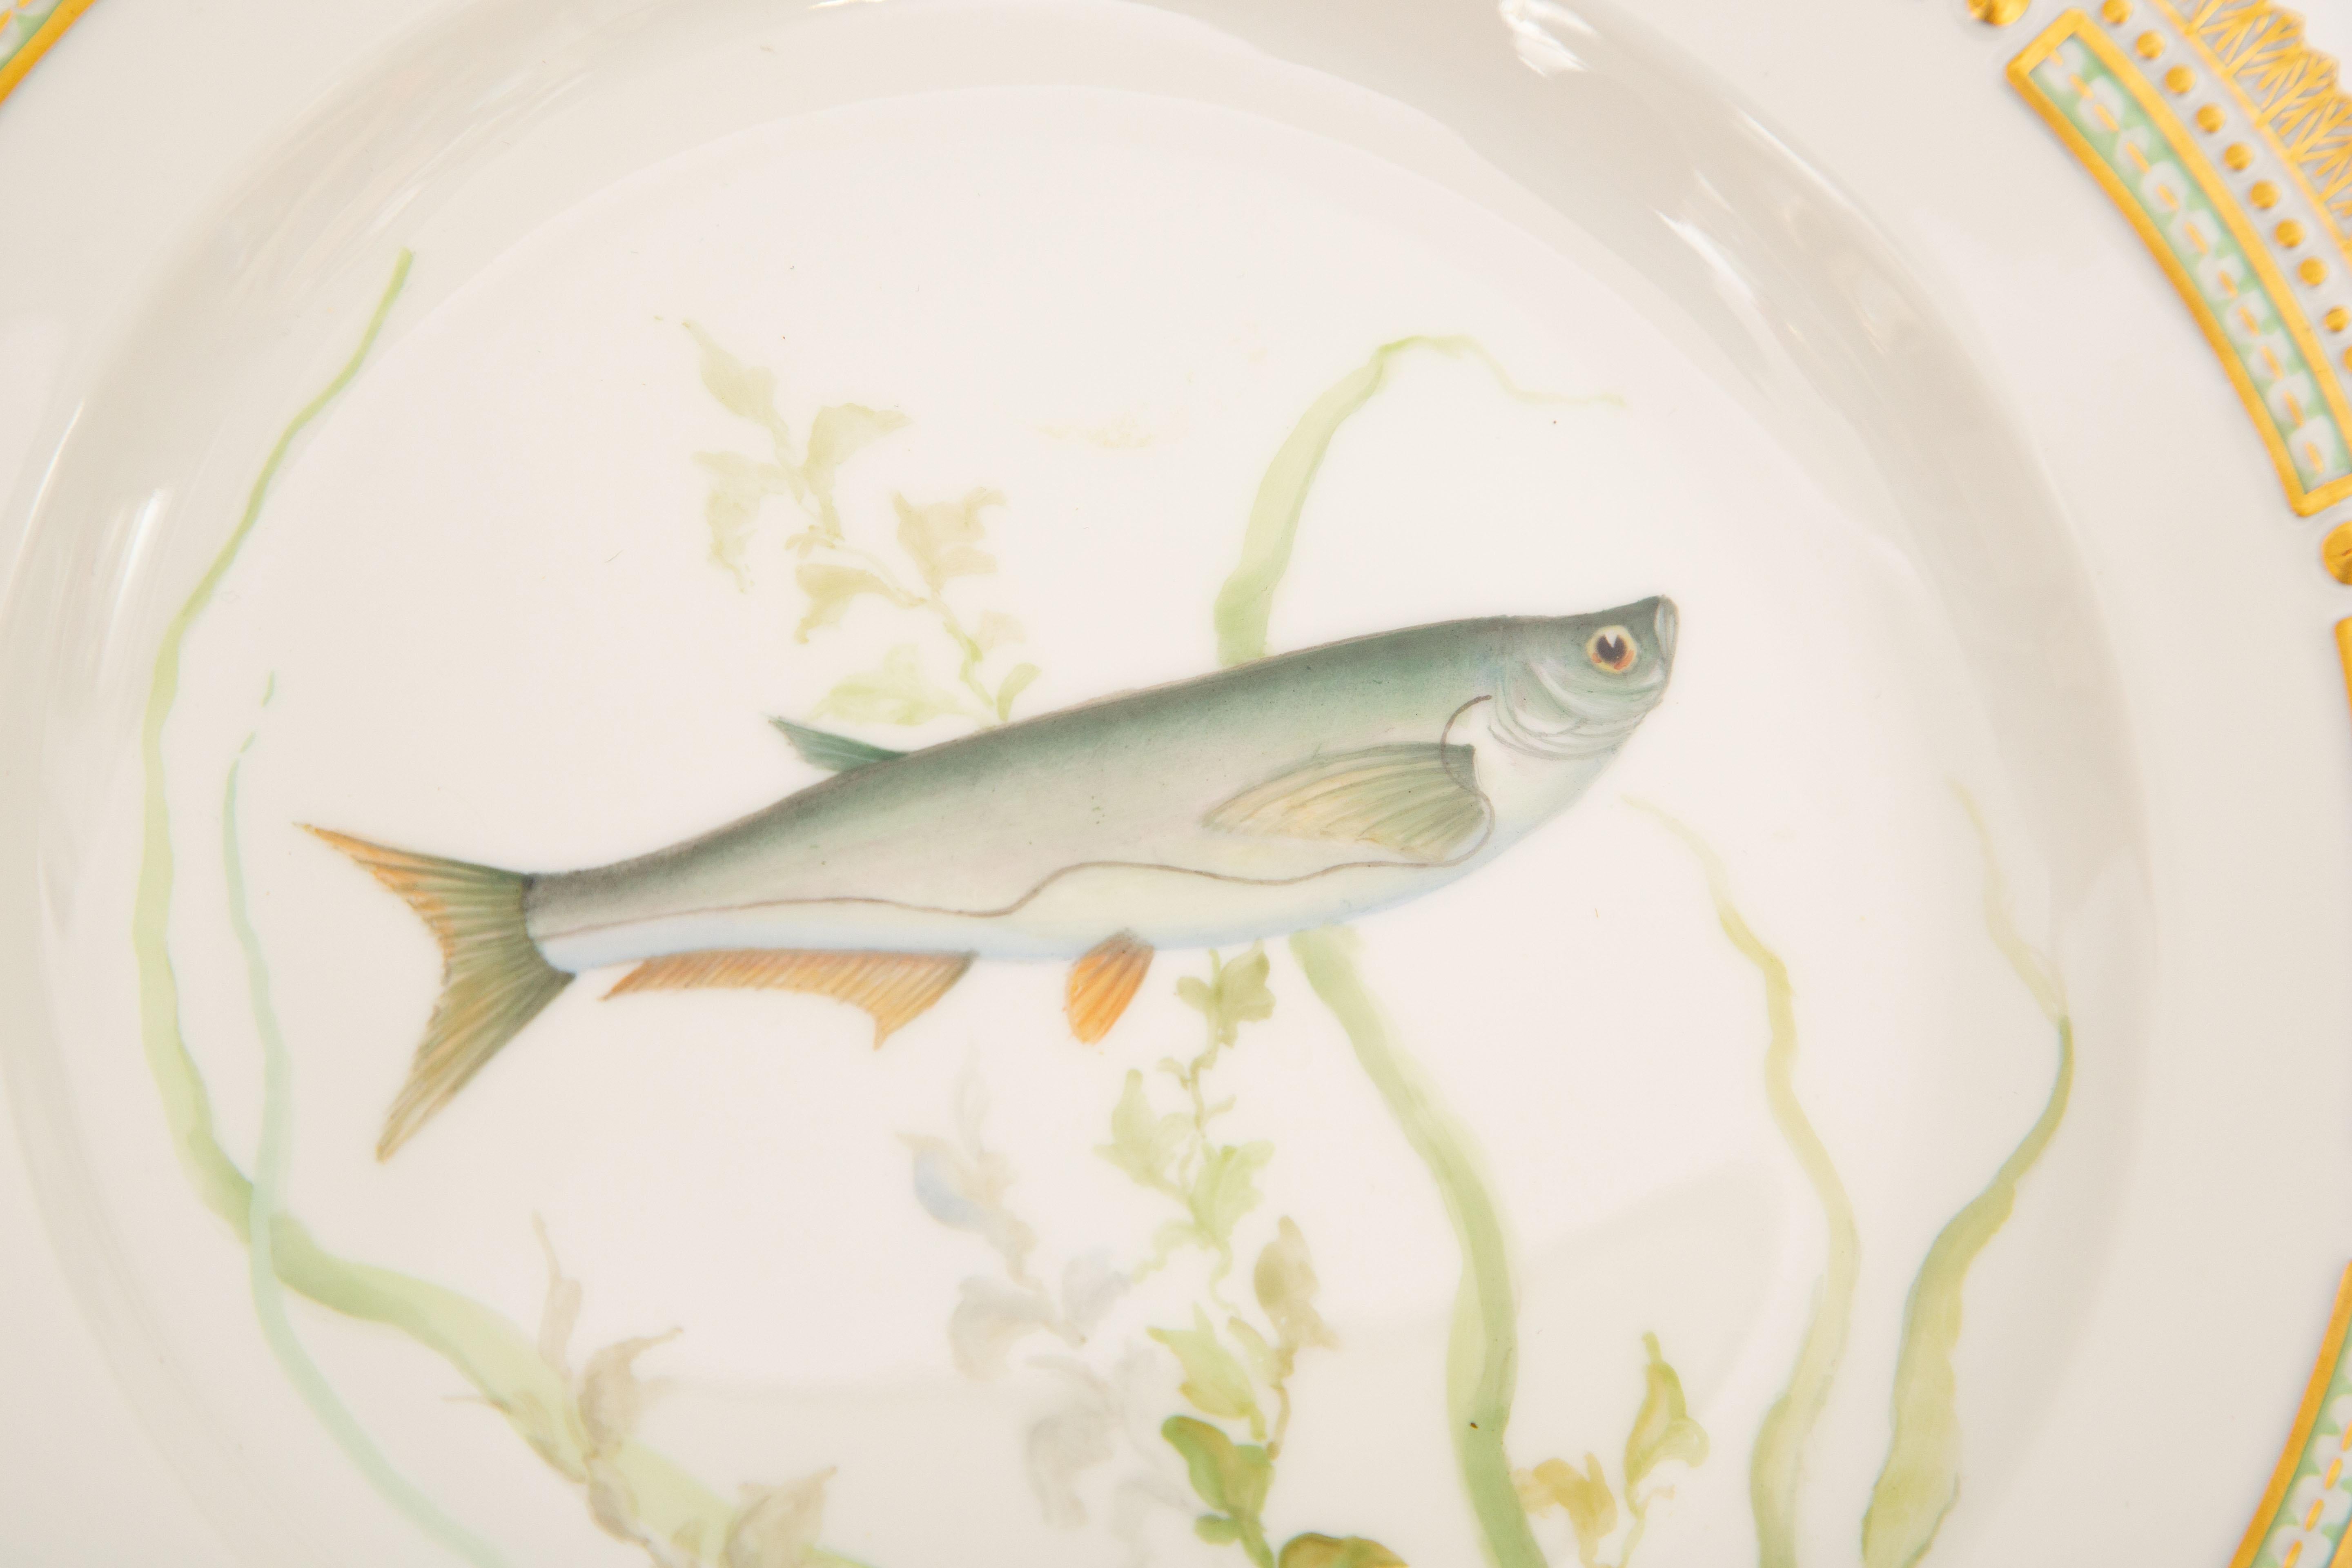 12 Flora Danica Fish Plates, Vintage and Vibrantly Painted, Royal Copenhagen In Good Condition For Sale In West Palm Beach, FL